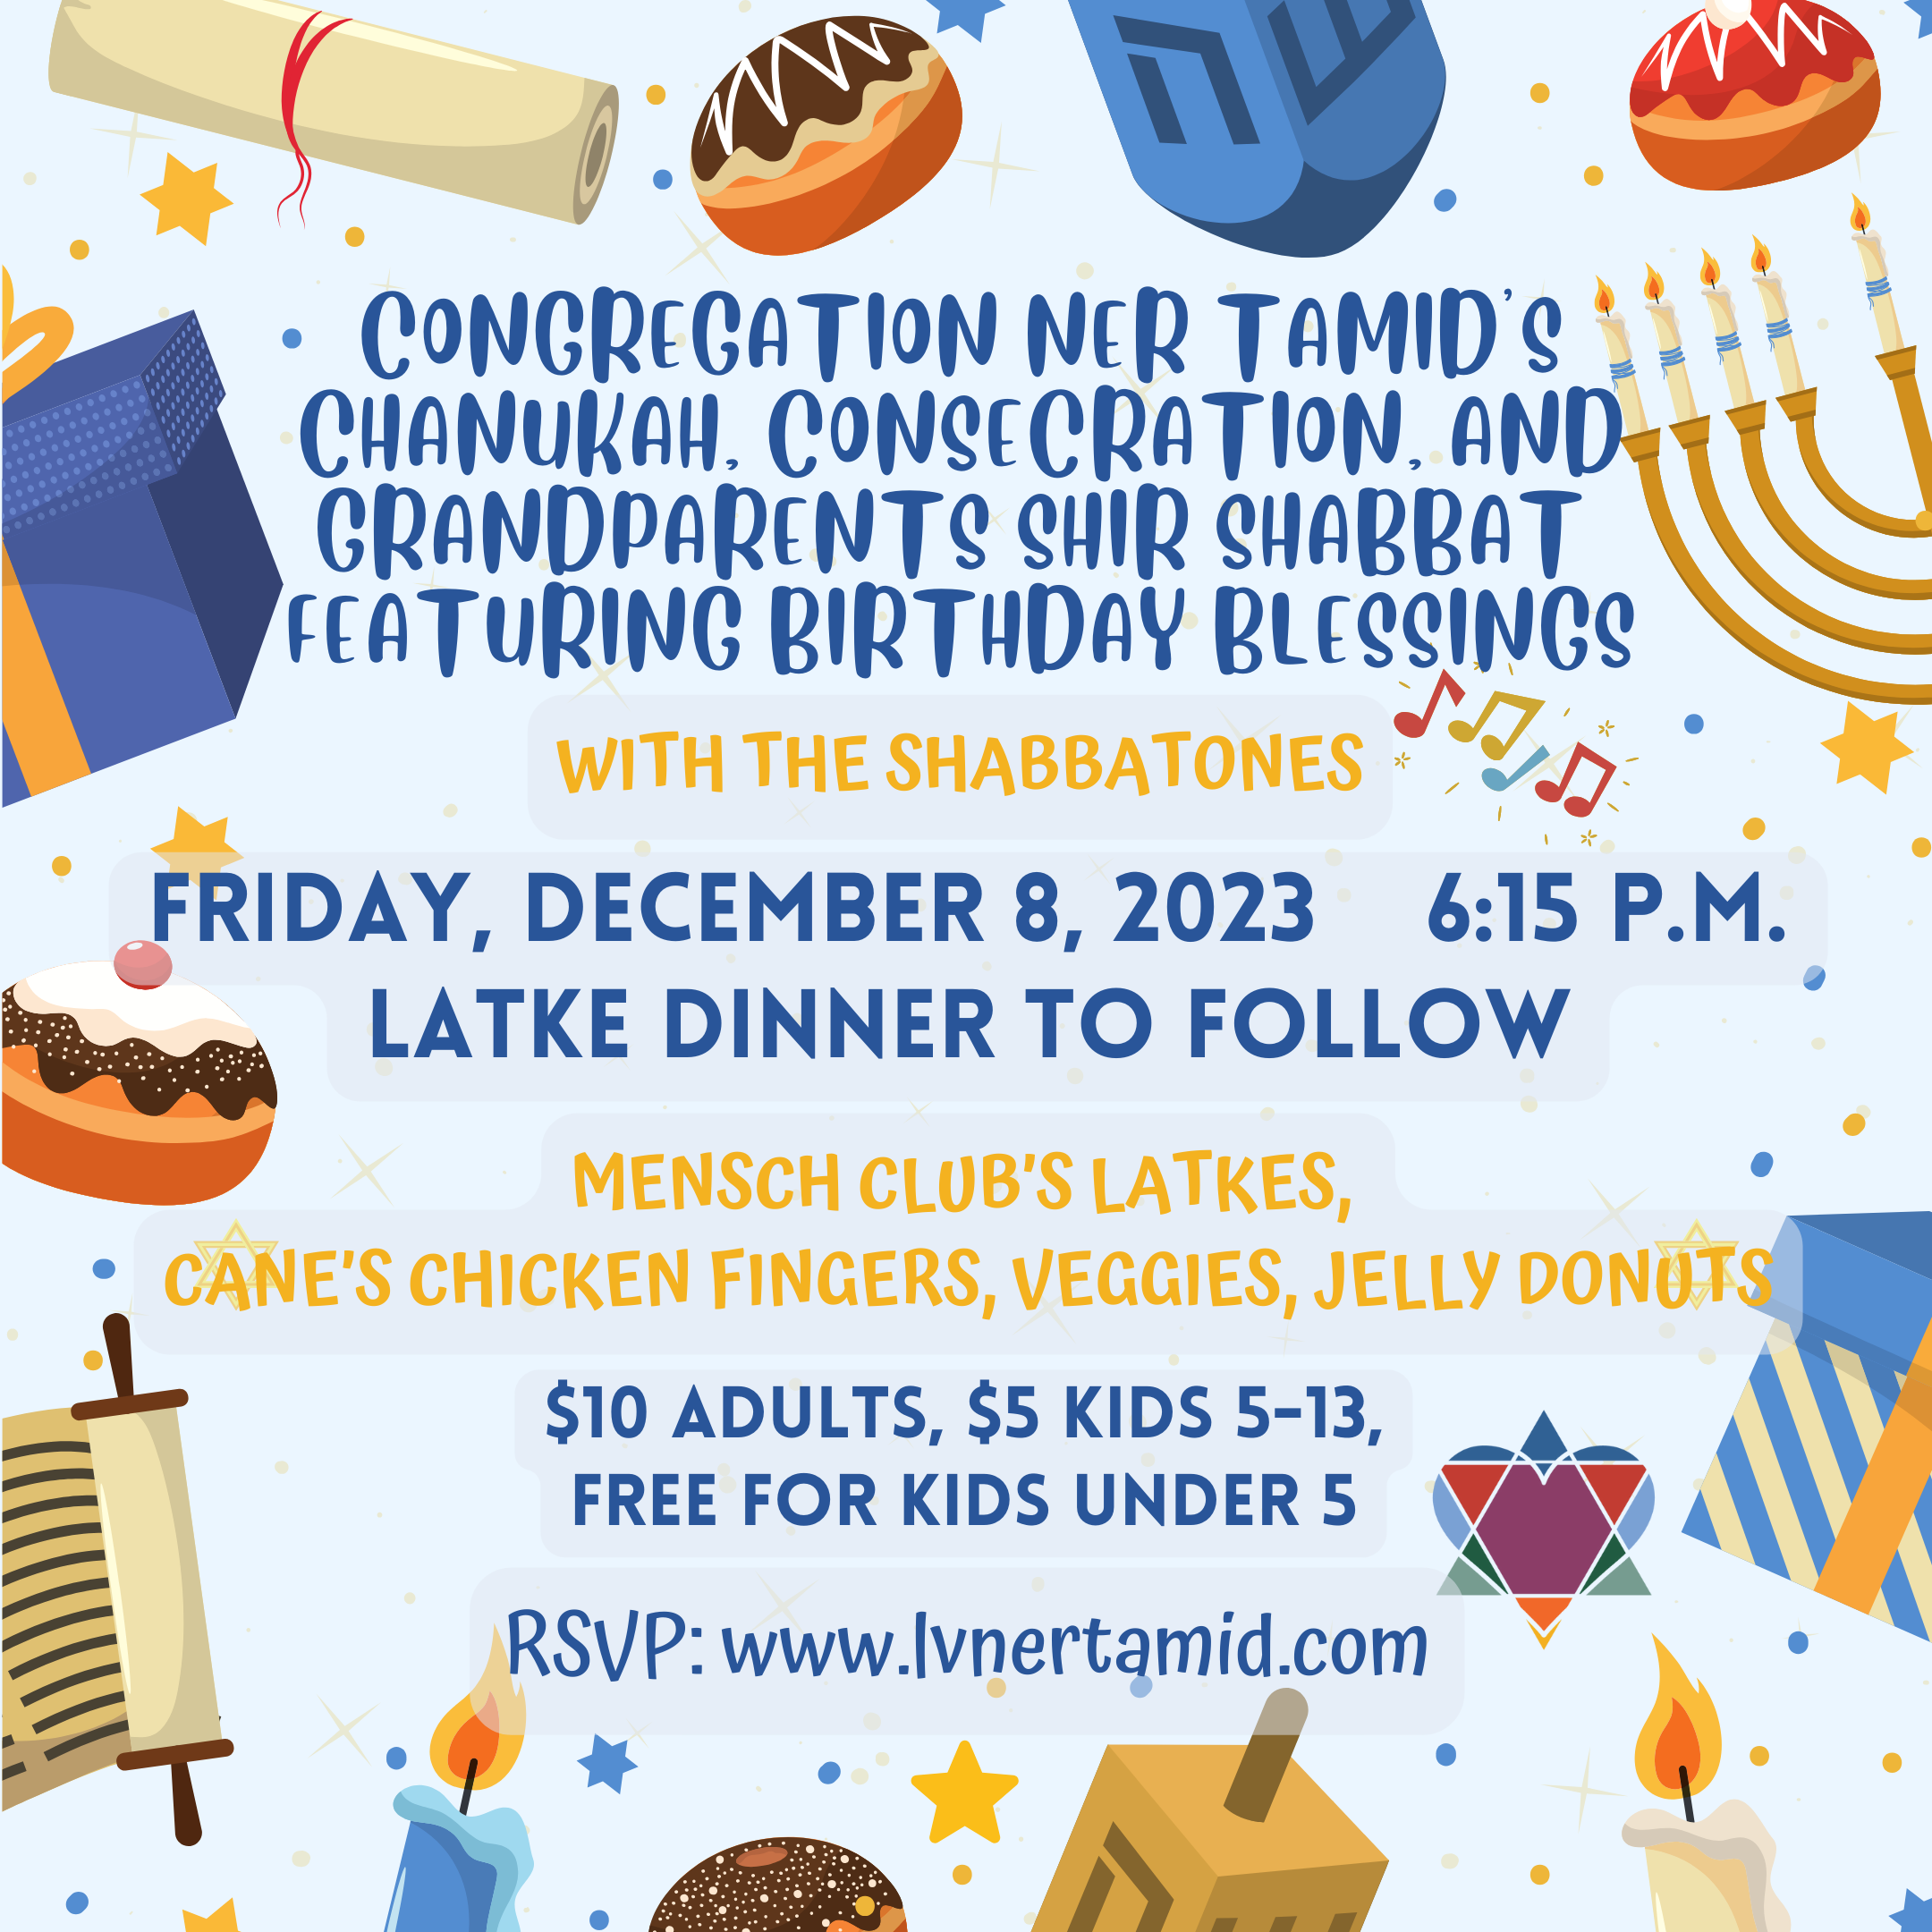 CHANUKAH, CONSECRATION AND GRANDPARENTS SHIR SHABBAT WITH THE SHABBATONES FEATURING BIRTHDAY BLESSINGS AND LATKE DINNER